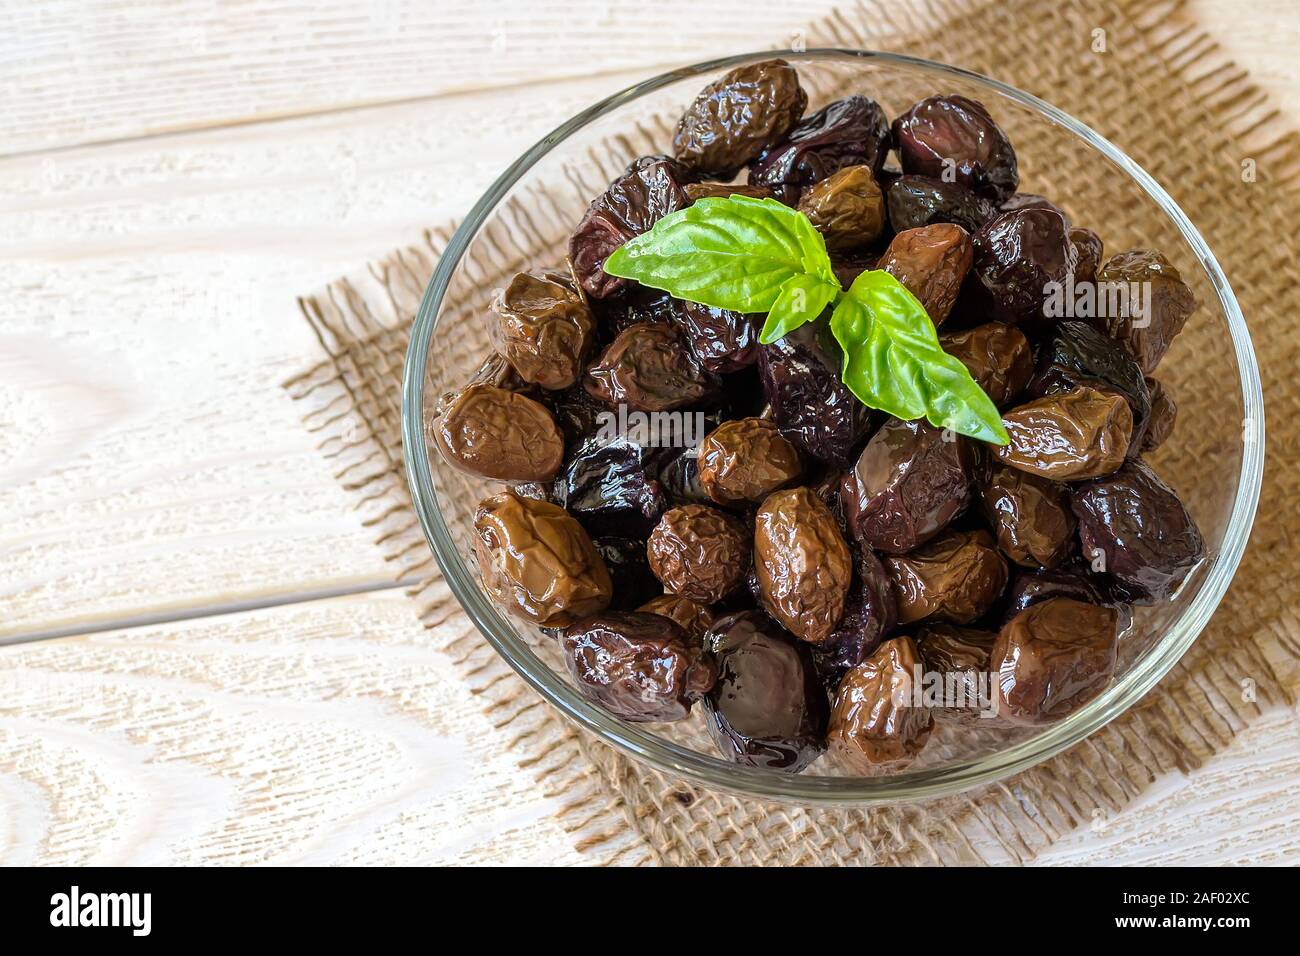 Sun-dried or cured olives in a glass bowl on a white rustic wooden table. Healhy eating and vegetarian food. Ingredient for tapenade, sandwich, salad. Stock Photo